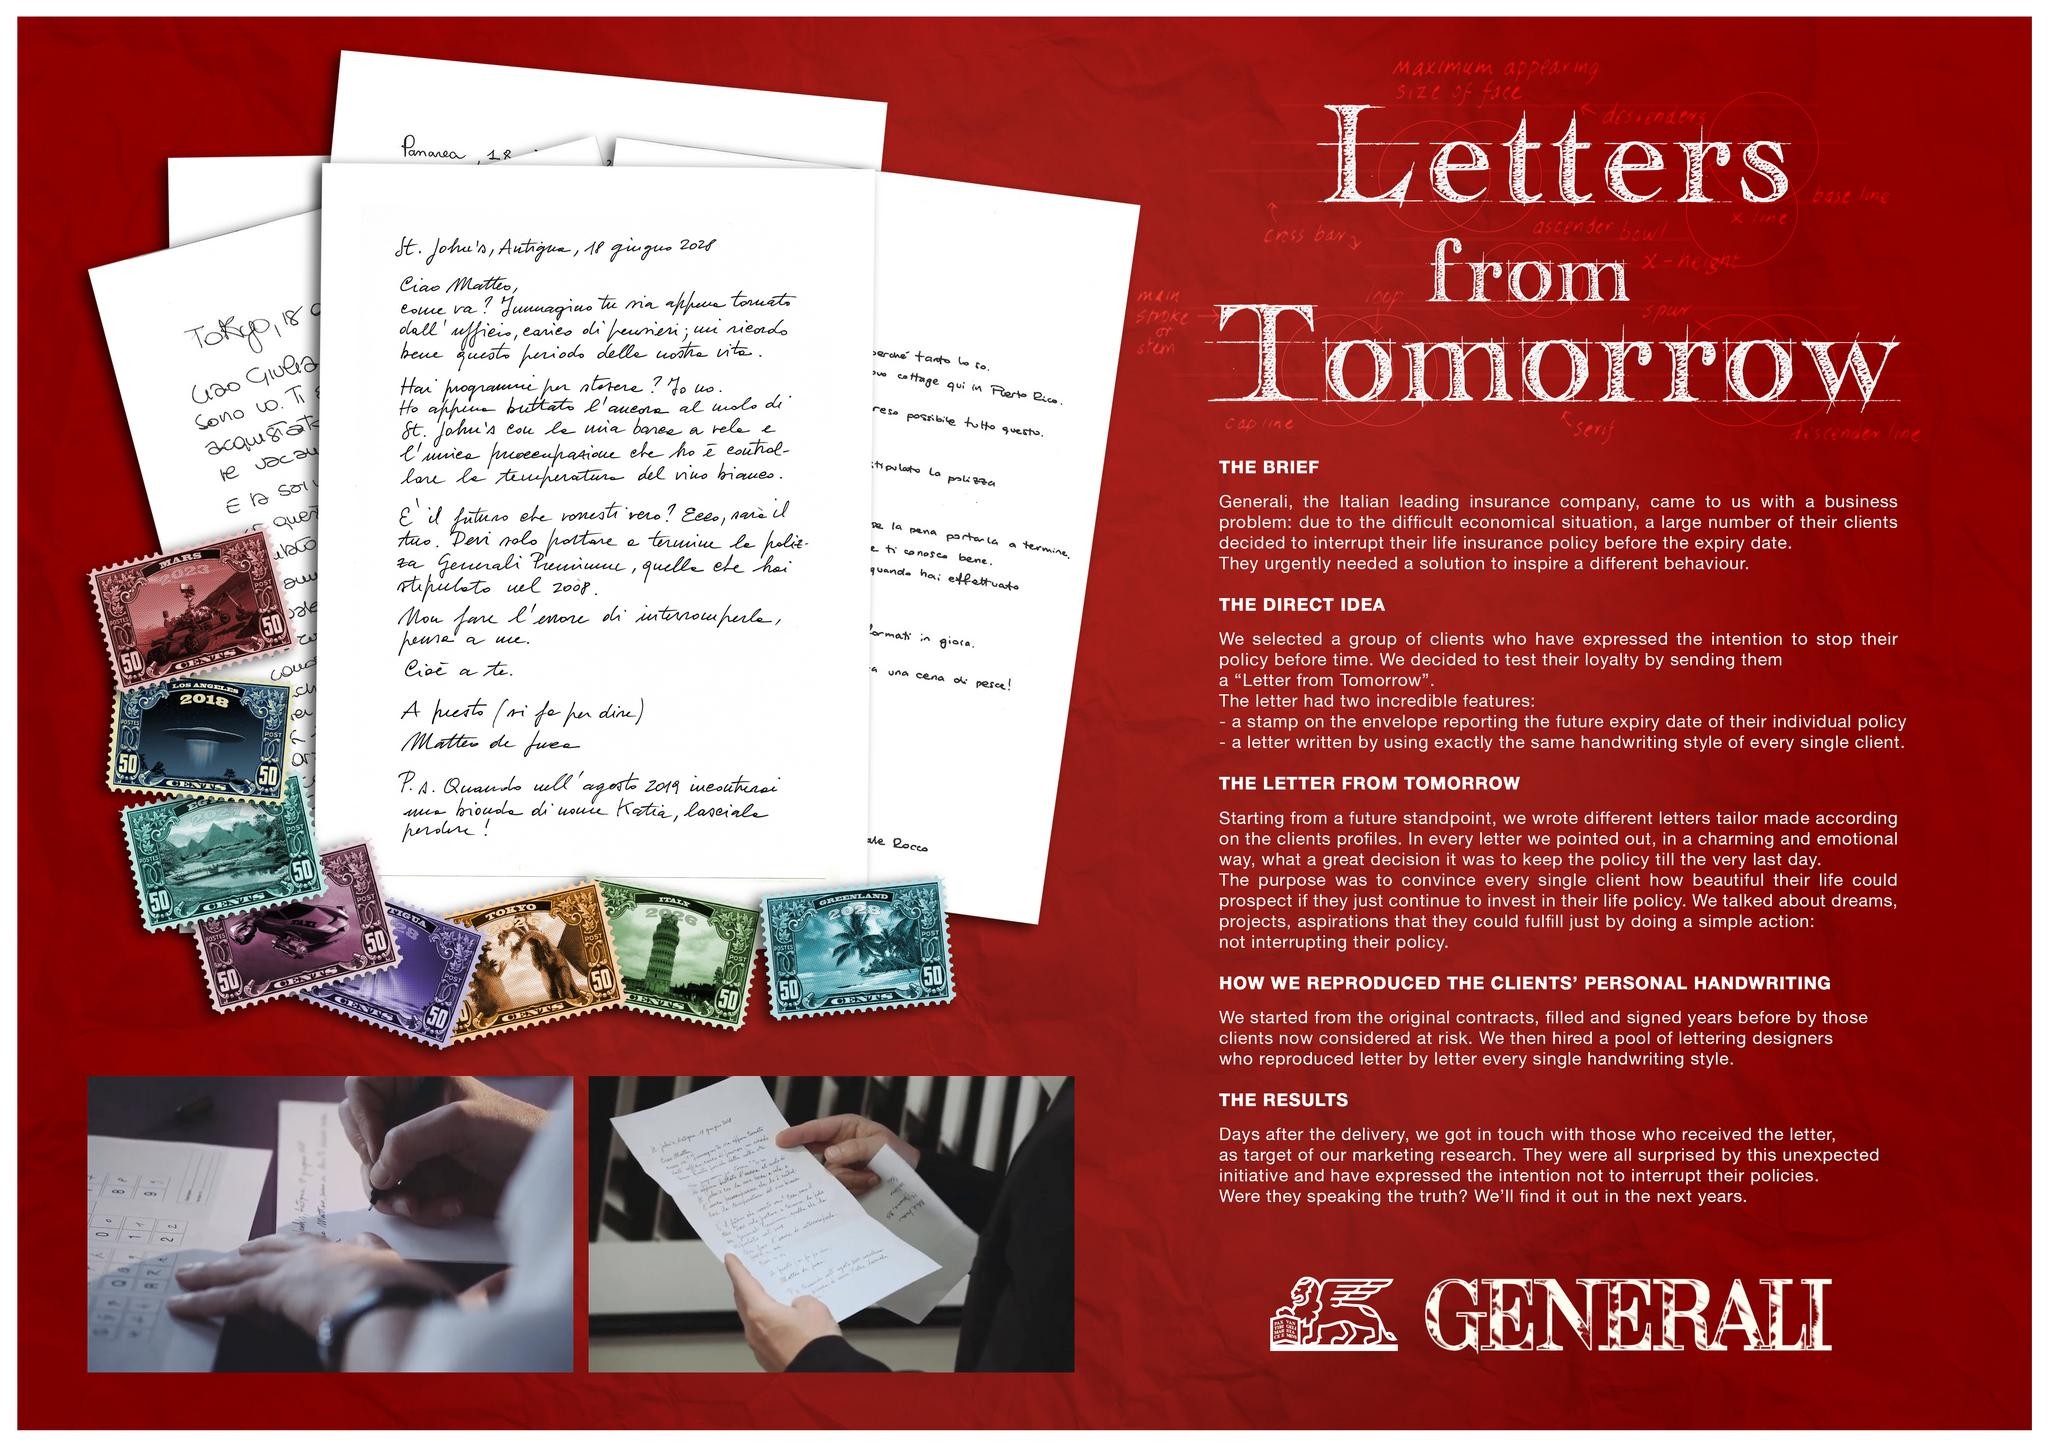 LETTERS FROM TOMORROW